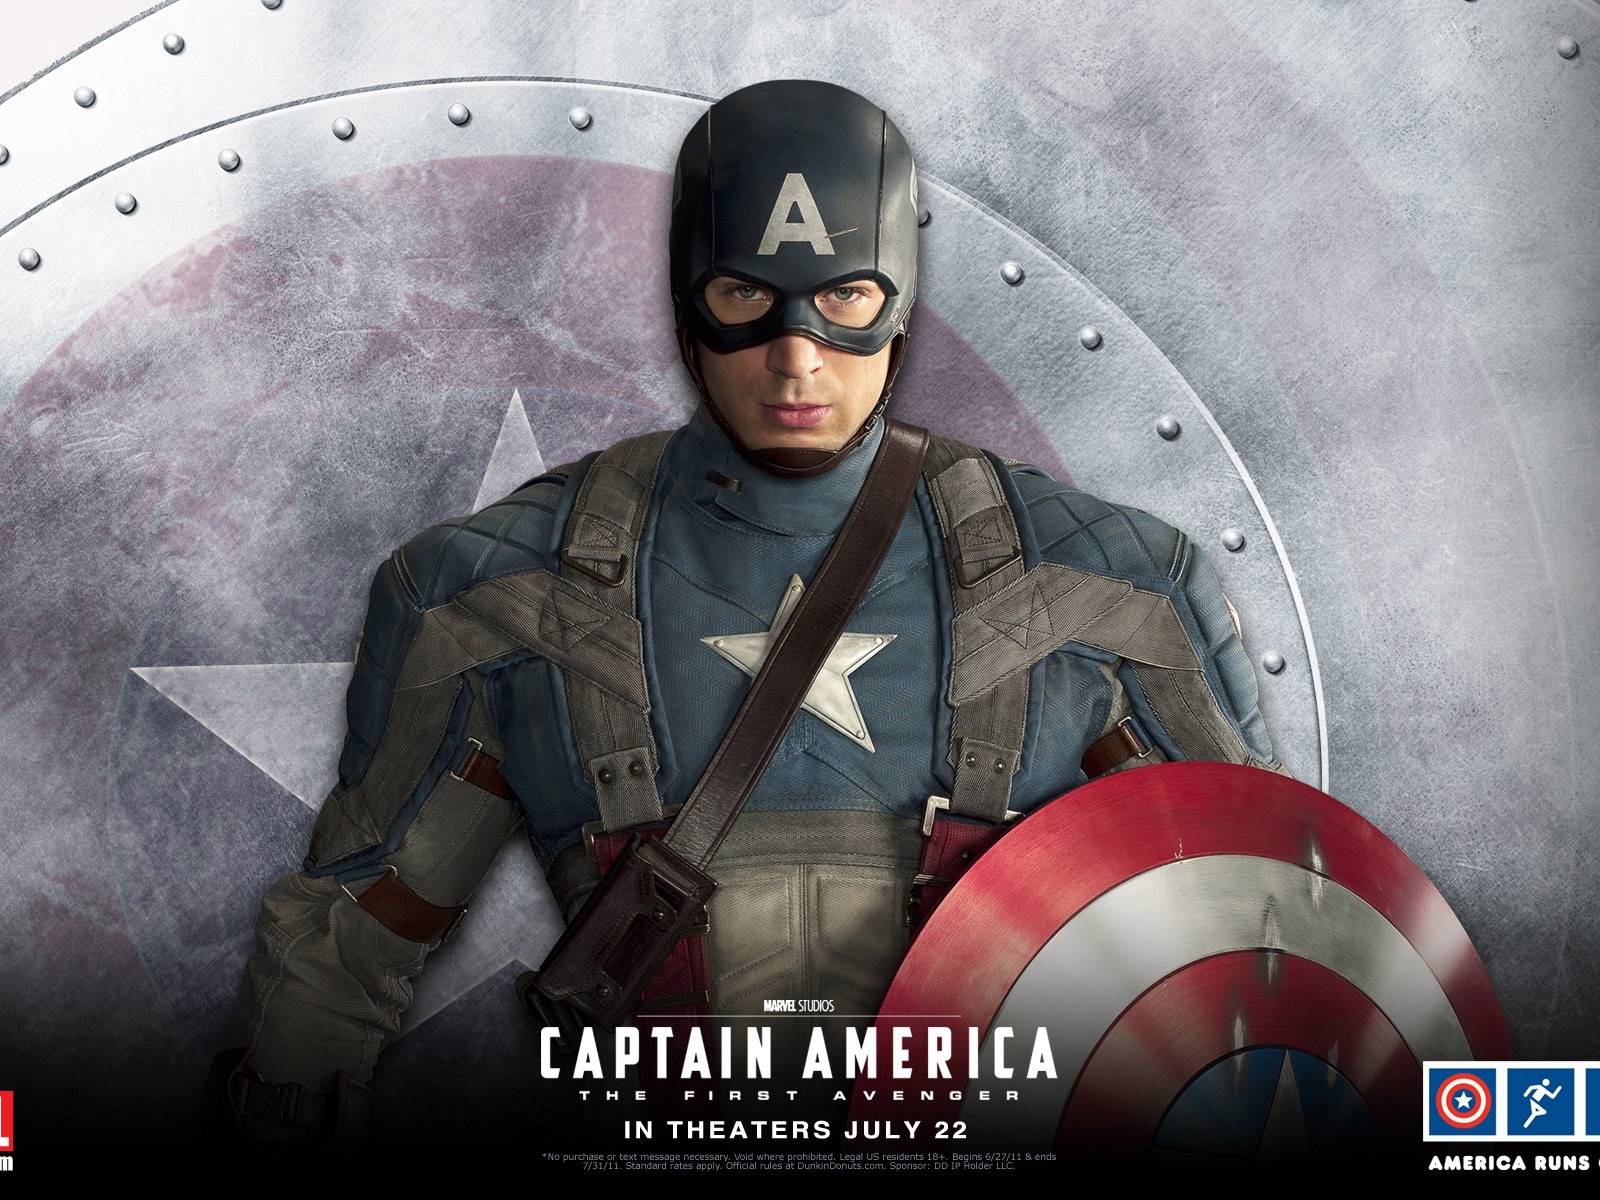 Captain America: The First Avenger wallpapers HD #4 - 1600x1200